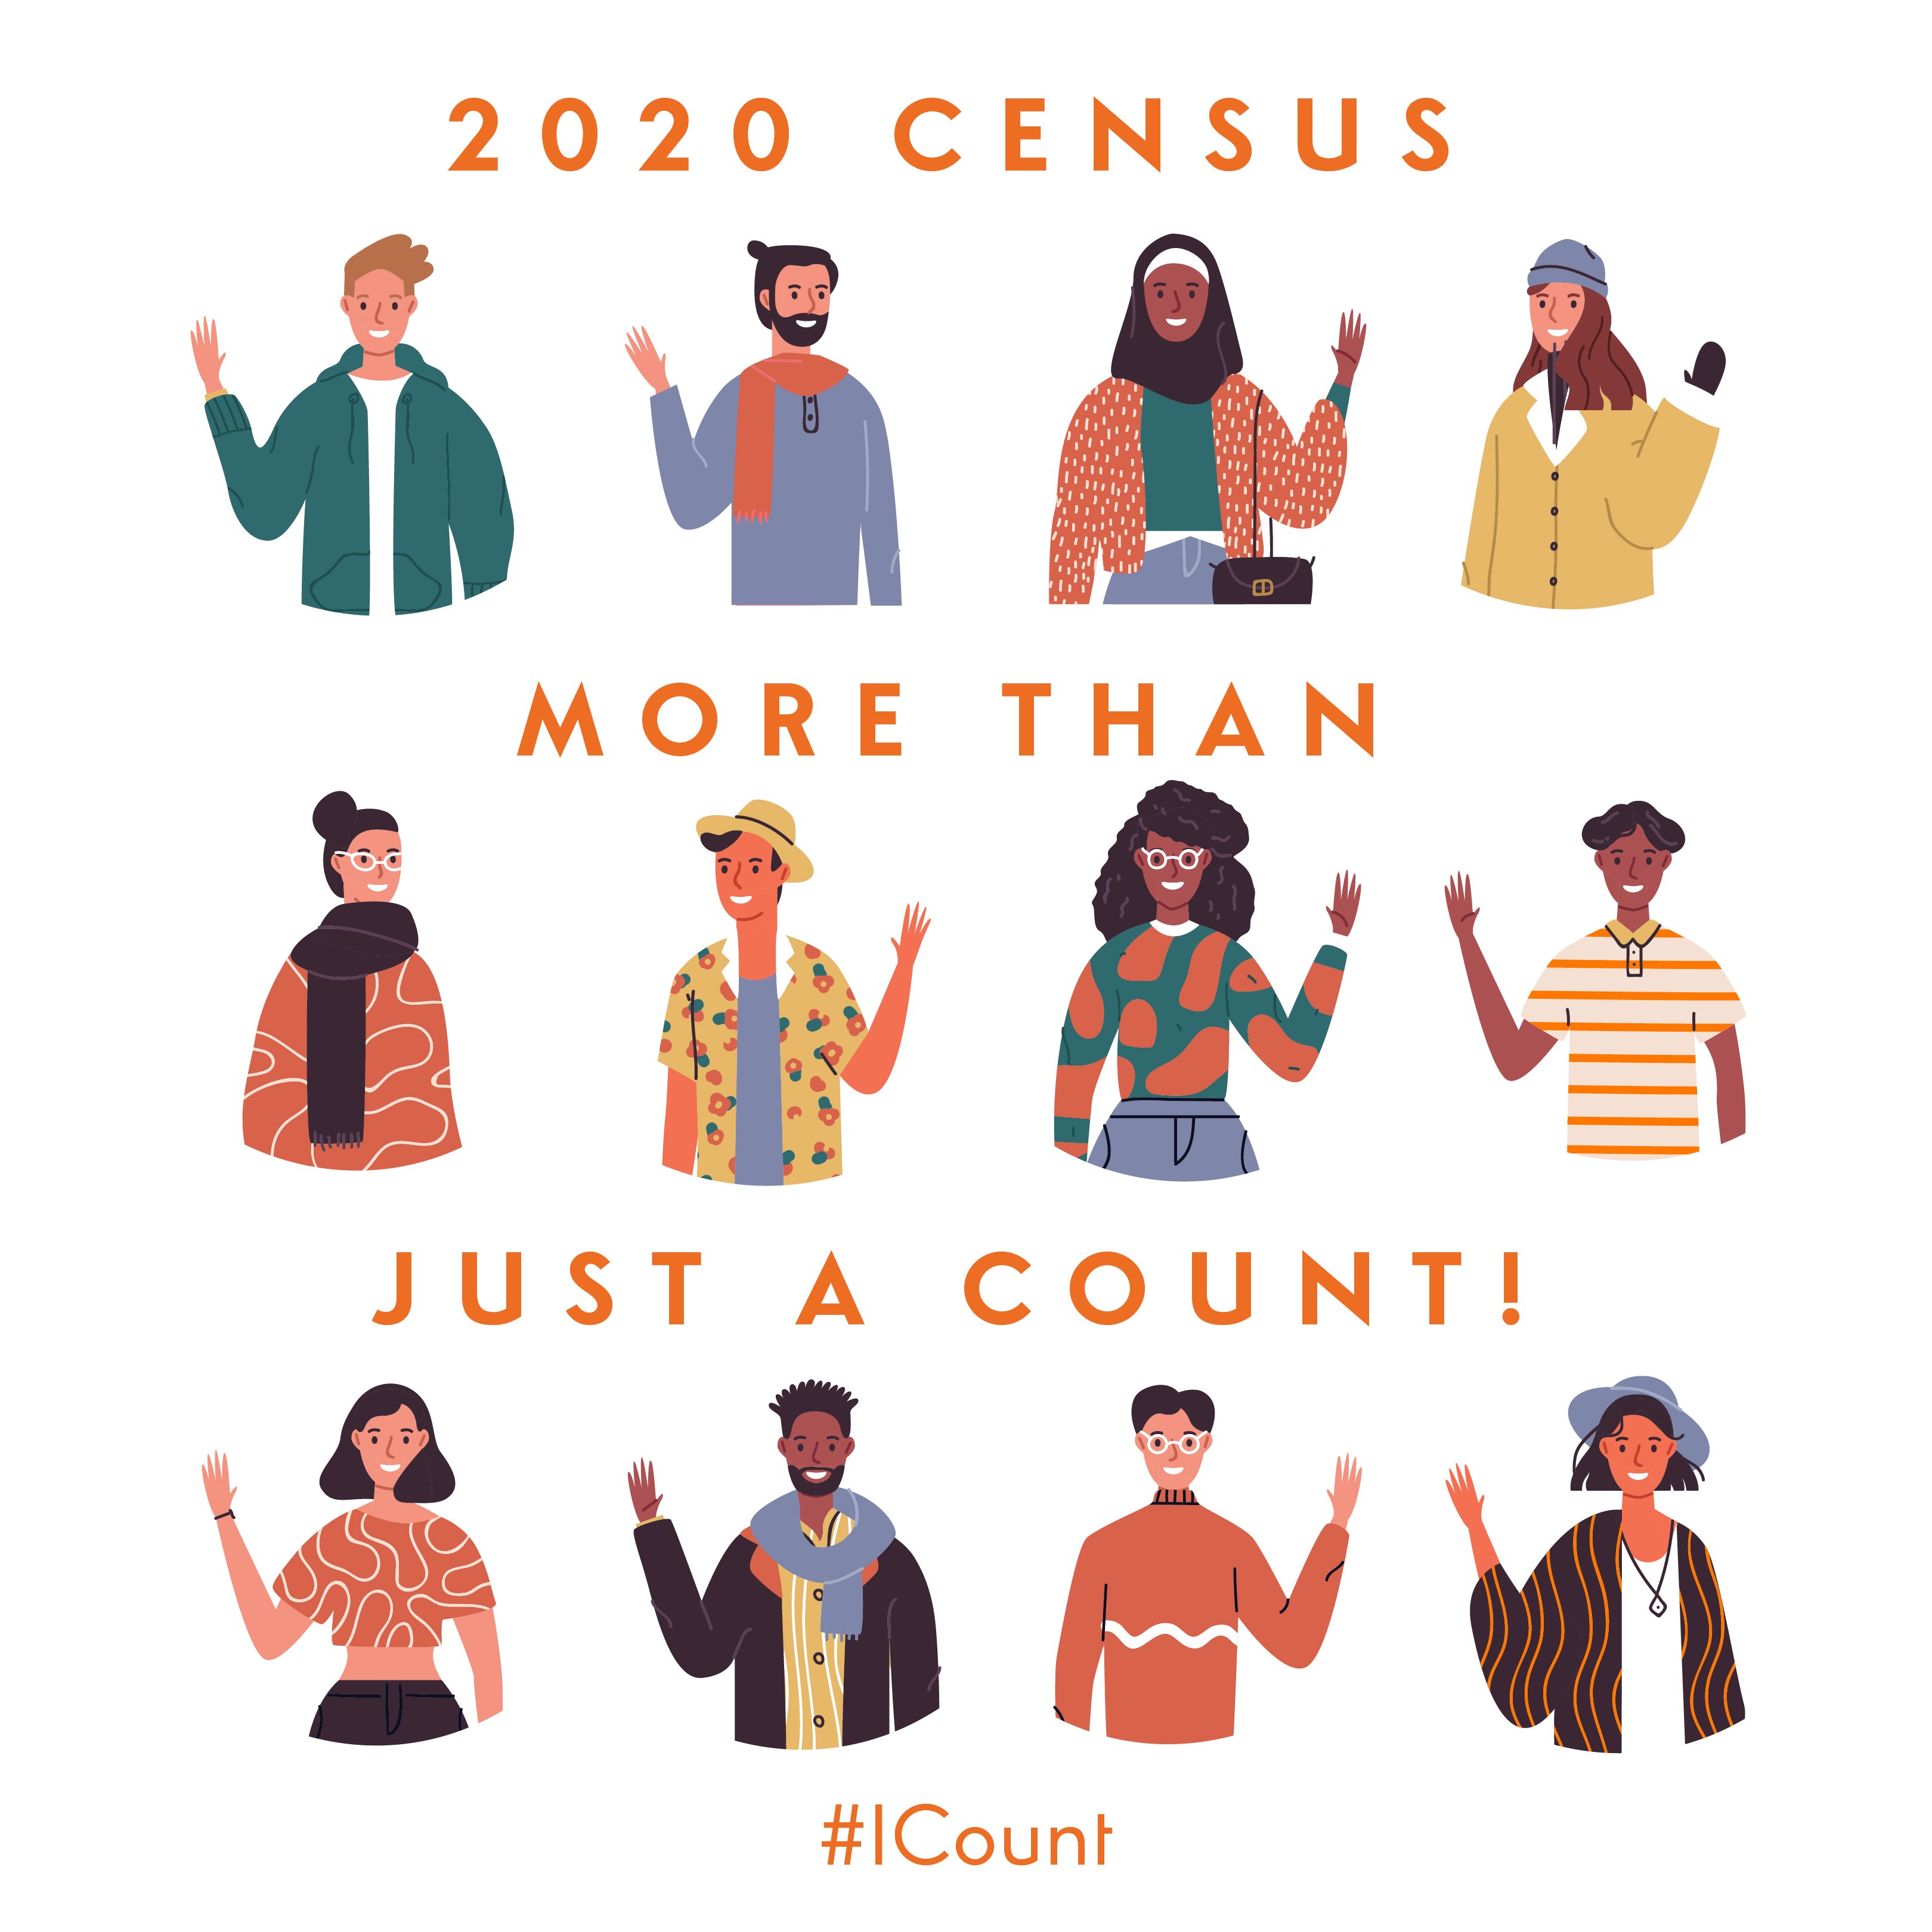 More than a count census - diverse people all waving